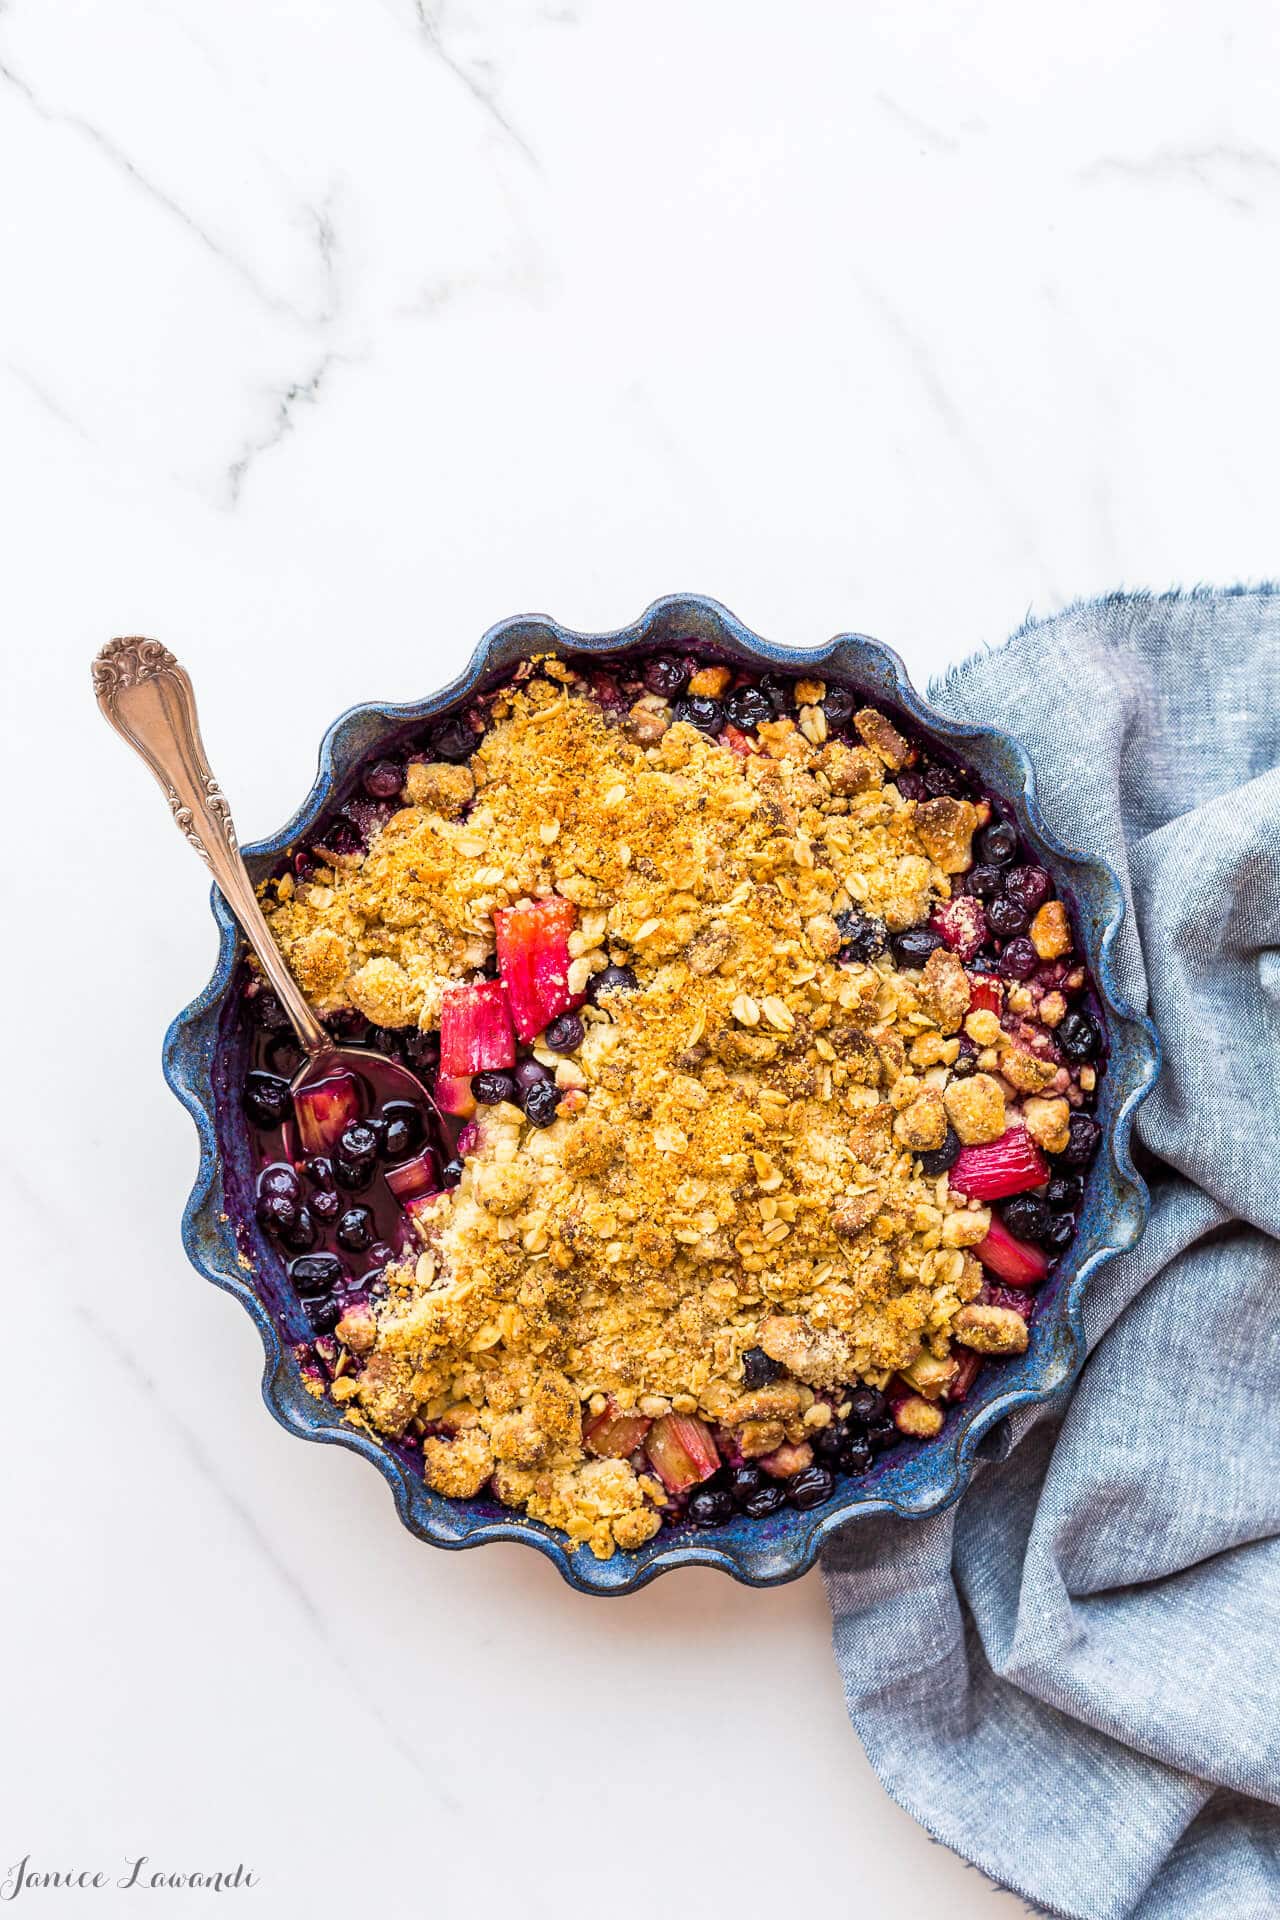 Blueberry rhubarb crumble with a marzipan oat crumble topping served in a round ceramic blue baking dish with a fluted edge. The blueberry rhubarb filling is very juicy.